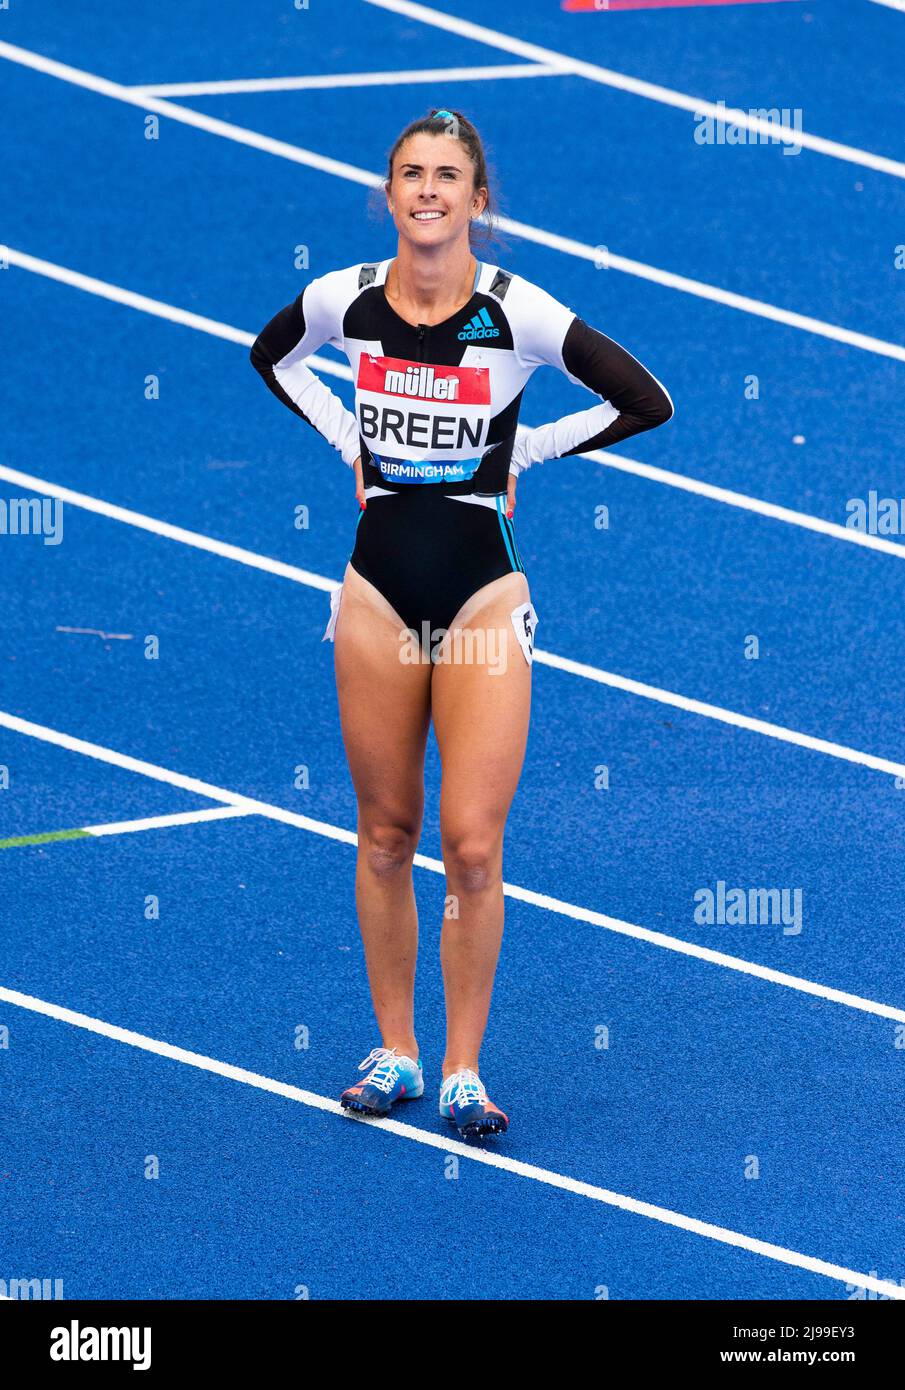 21-MAY-2022 Olivia Green second with a time of 13.14 in the Women 100m Ambulant Event at the Muller Birmingham Diamond League Alexander Stadium, Perry Barr, Birmingham Credit: PATRICK ANTHONISZ/Alamy Live News Stock Photo